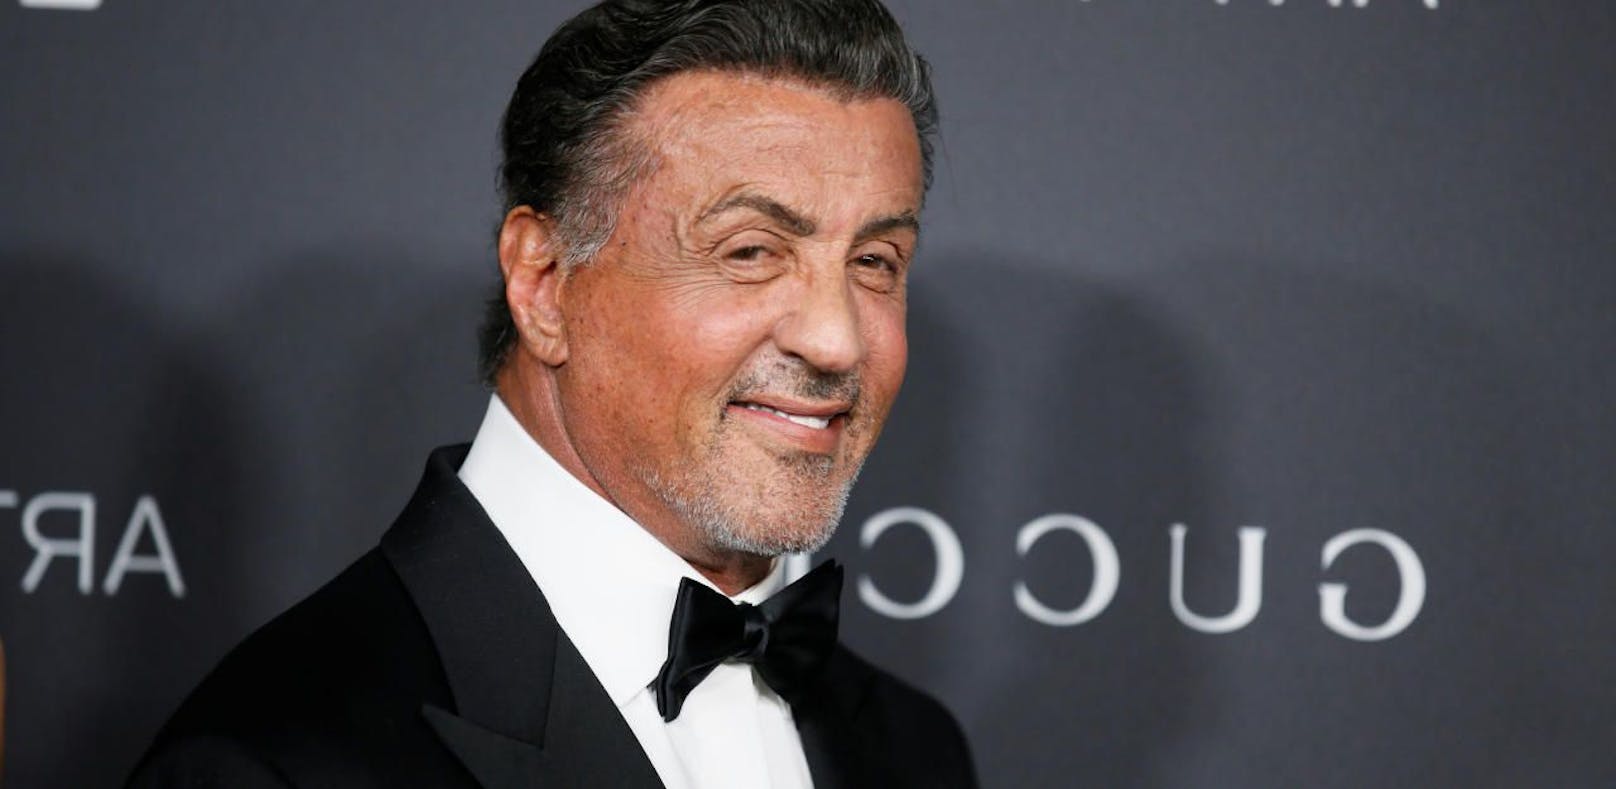 Sylvester Stallone: Gastrolle in "This Is Us"